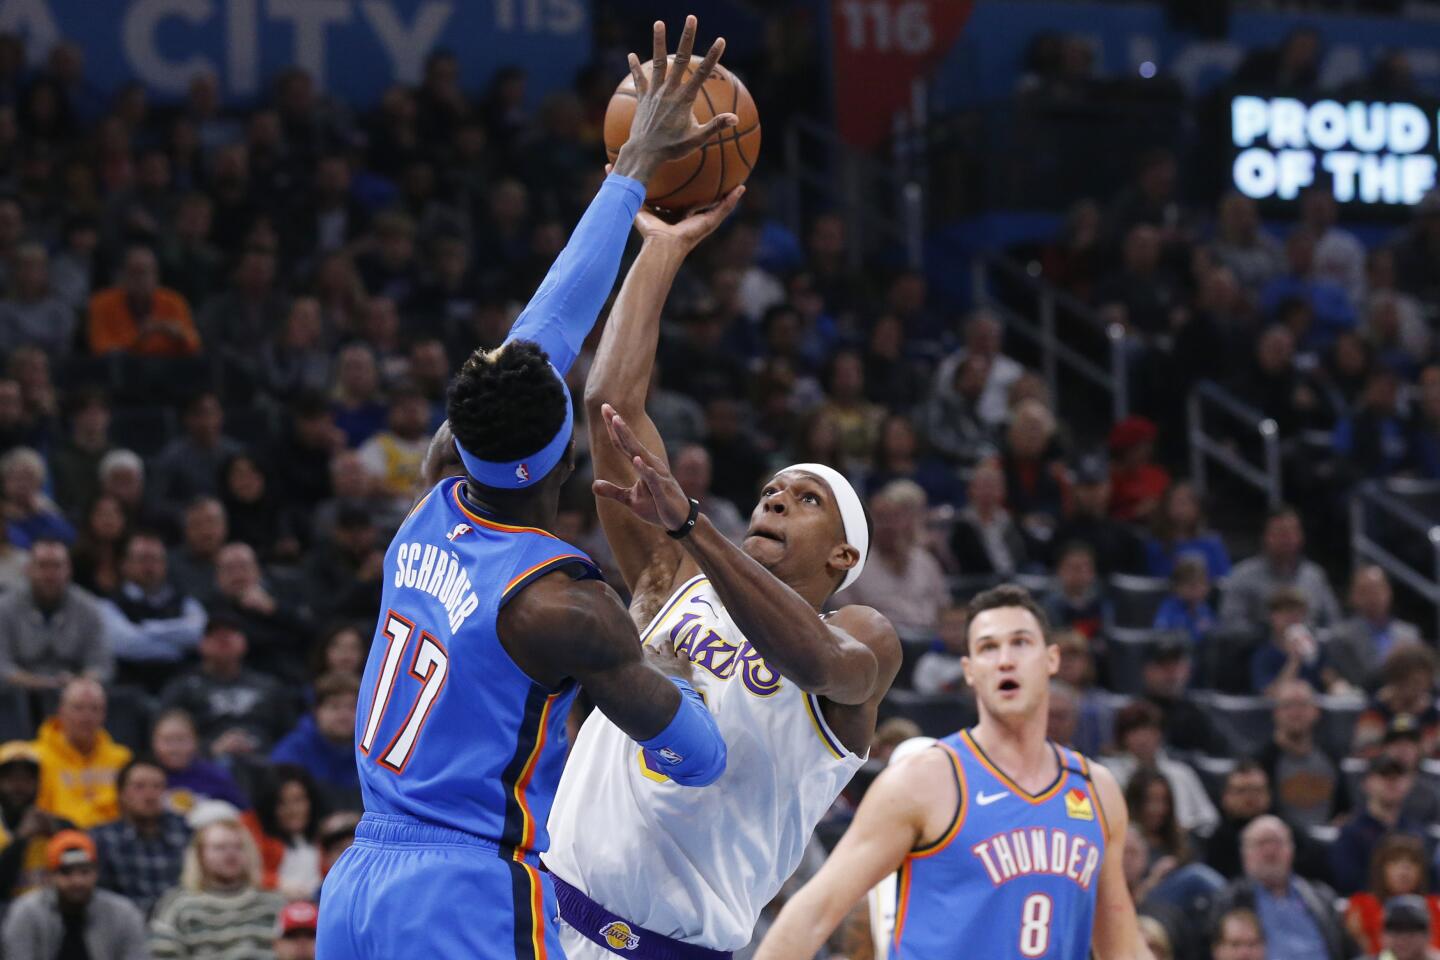 Lakers guard Rajon Rondo shoots over Thunder guard Dennis Schroder during the first half of a game Jan. 11 at Chesapeake Energy Arena.